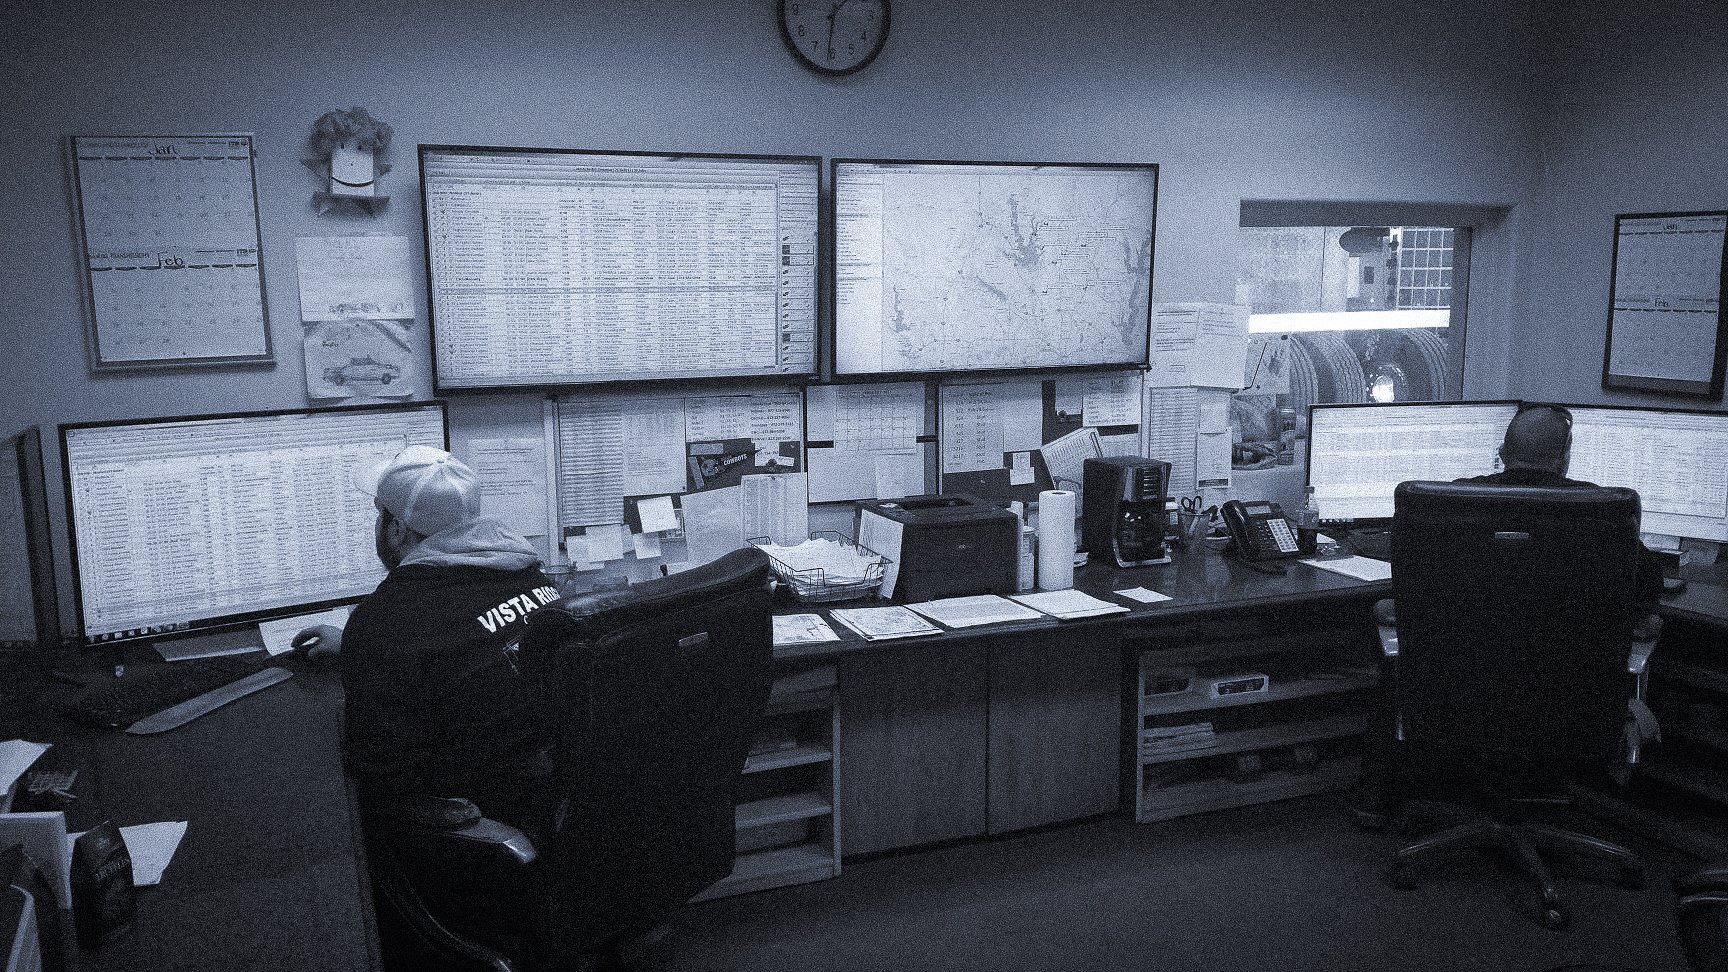 Heavy equipment dispatching team manages work on multiple screens.